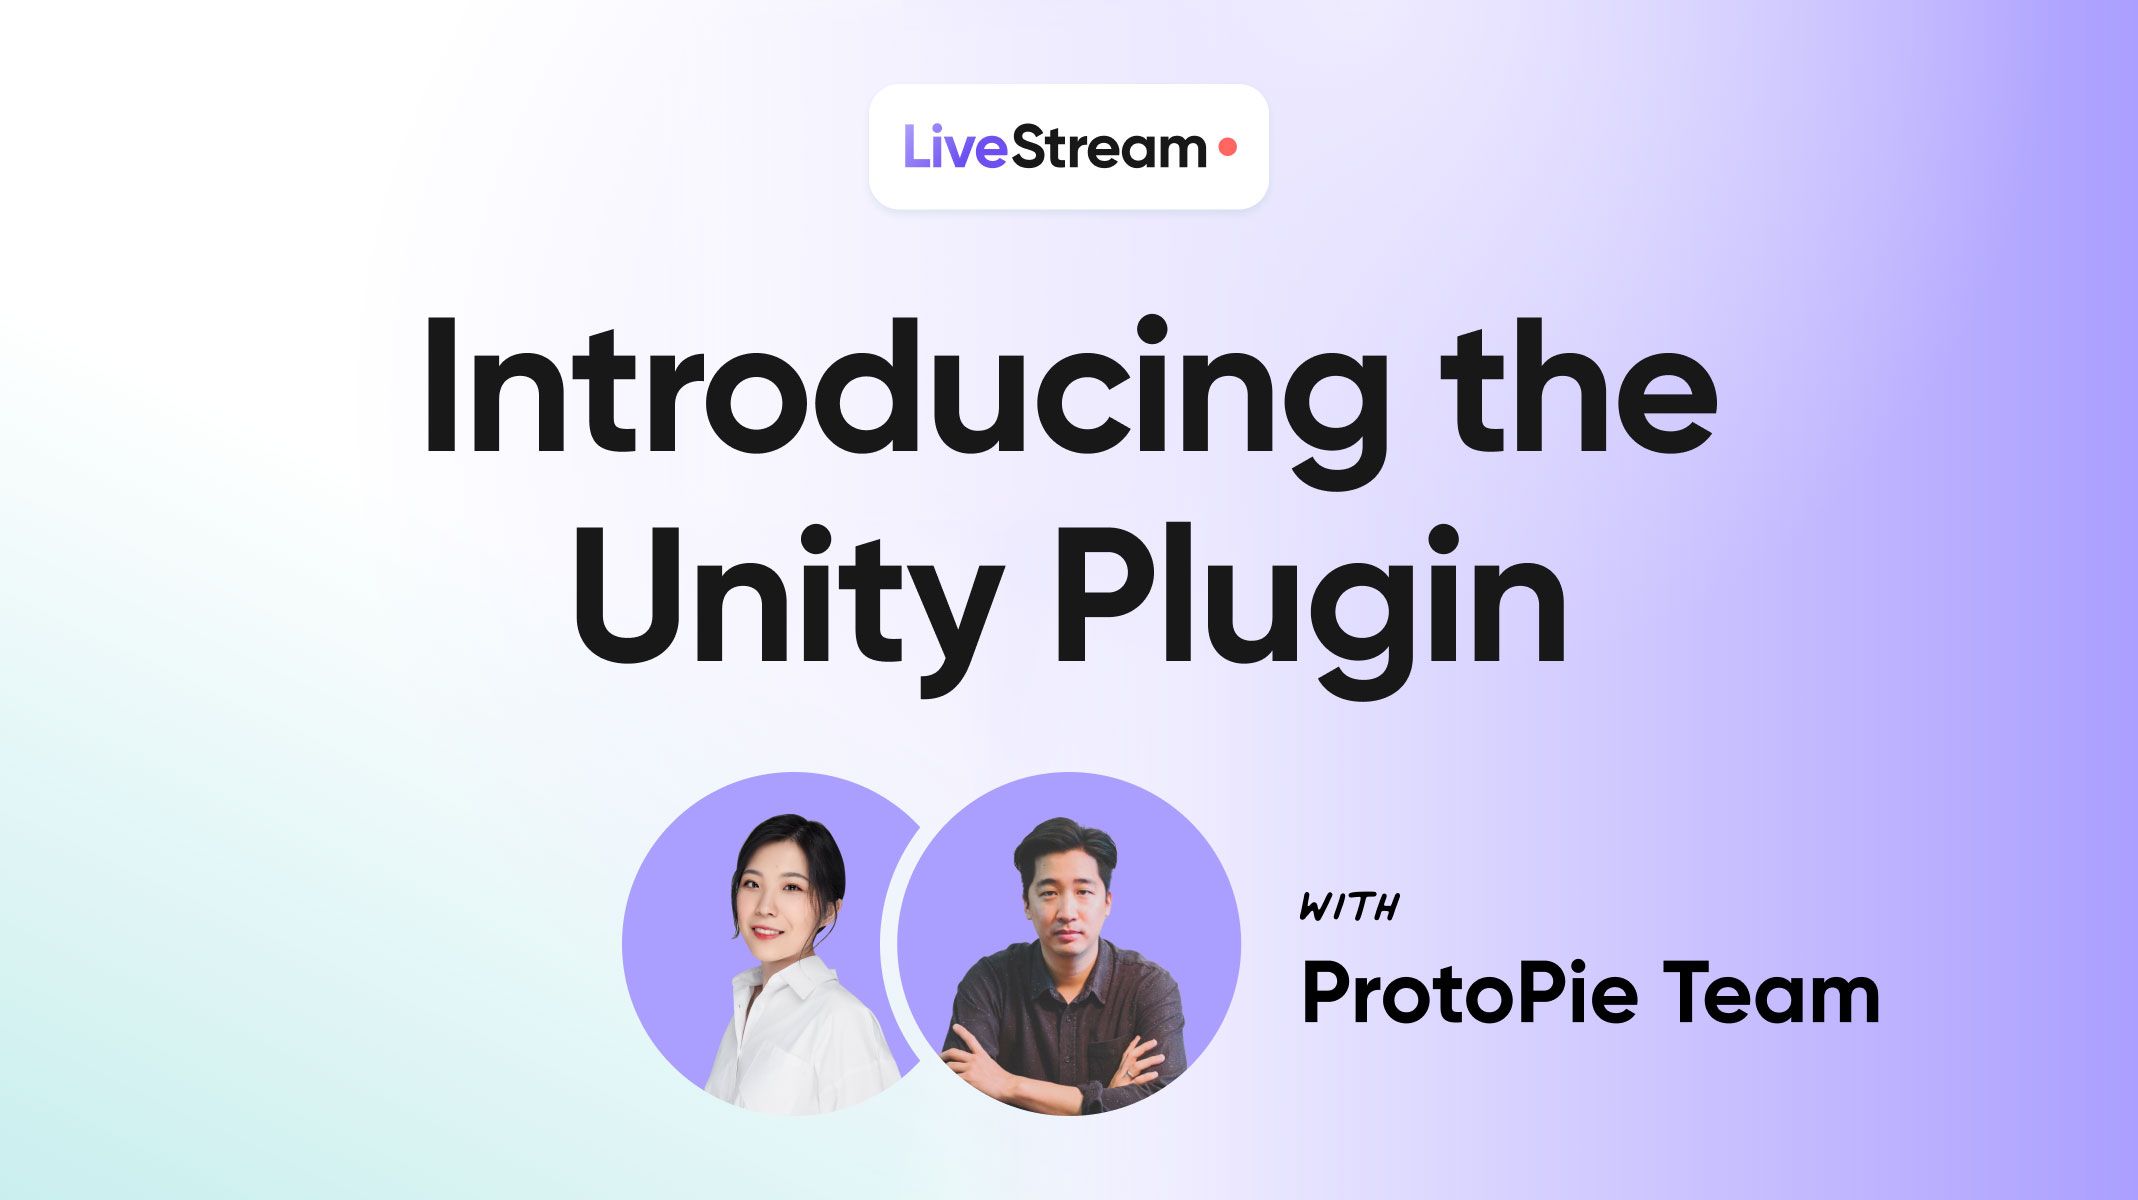 profile pictures of unity plugin launch event speakers